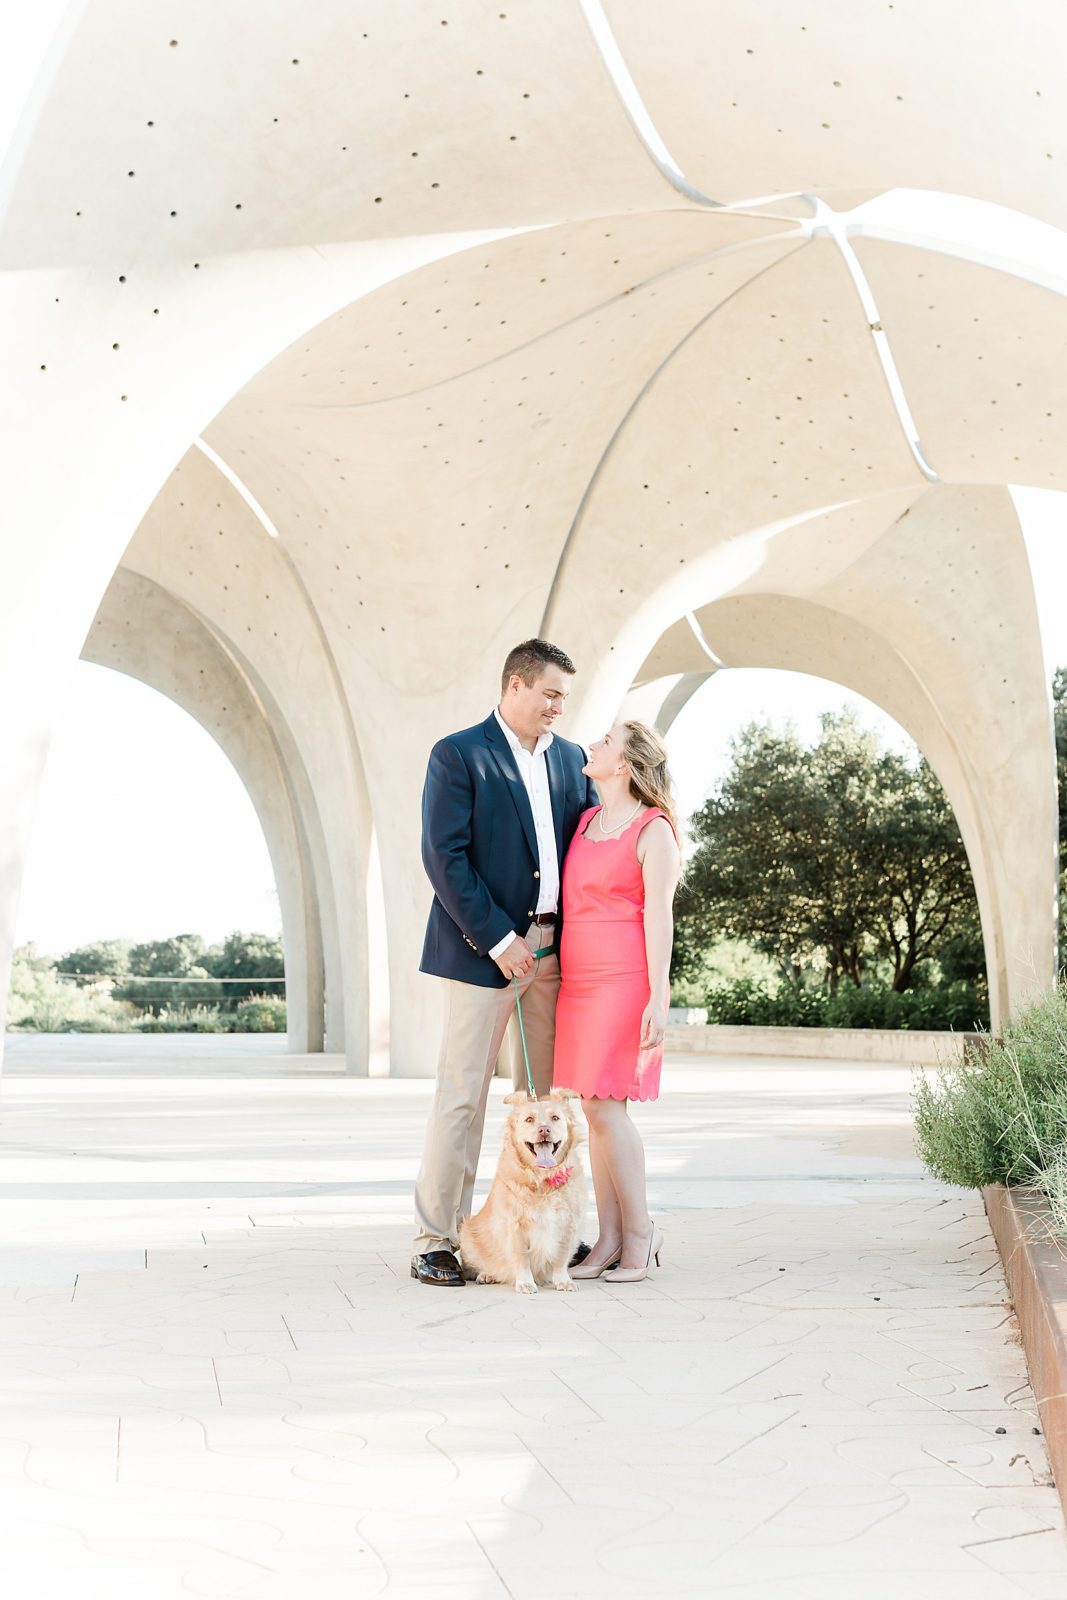 Navy and Pearls Couples Outfits, Confluence Park, Destination Wedding Photography